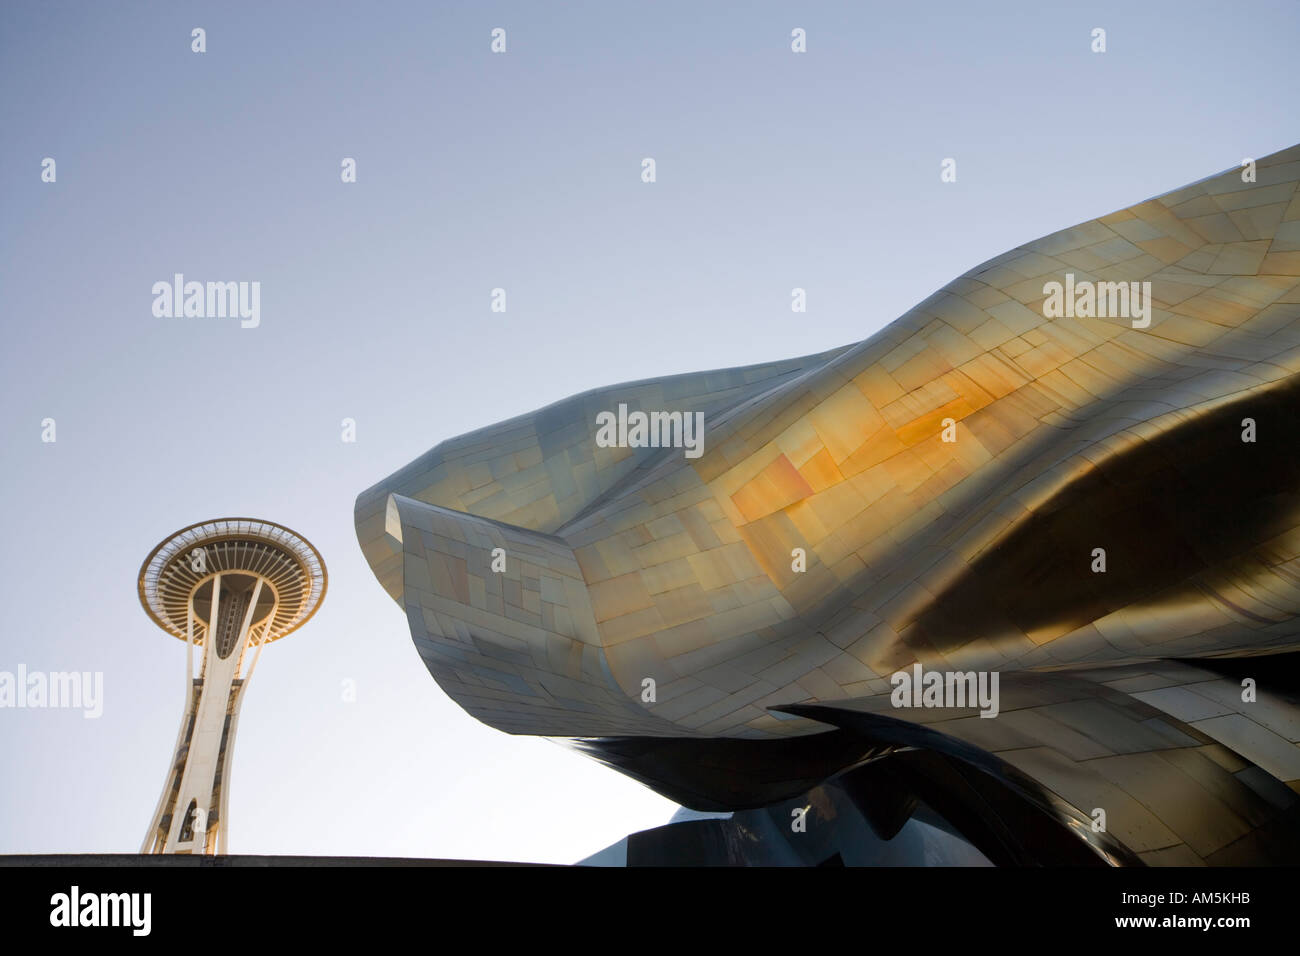 Seattle Space Needle seen from the Experience Music Project by Frank Gehry on the Seattle Center Campus. Stock Photo